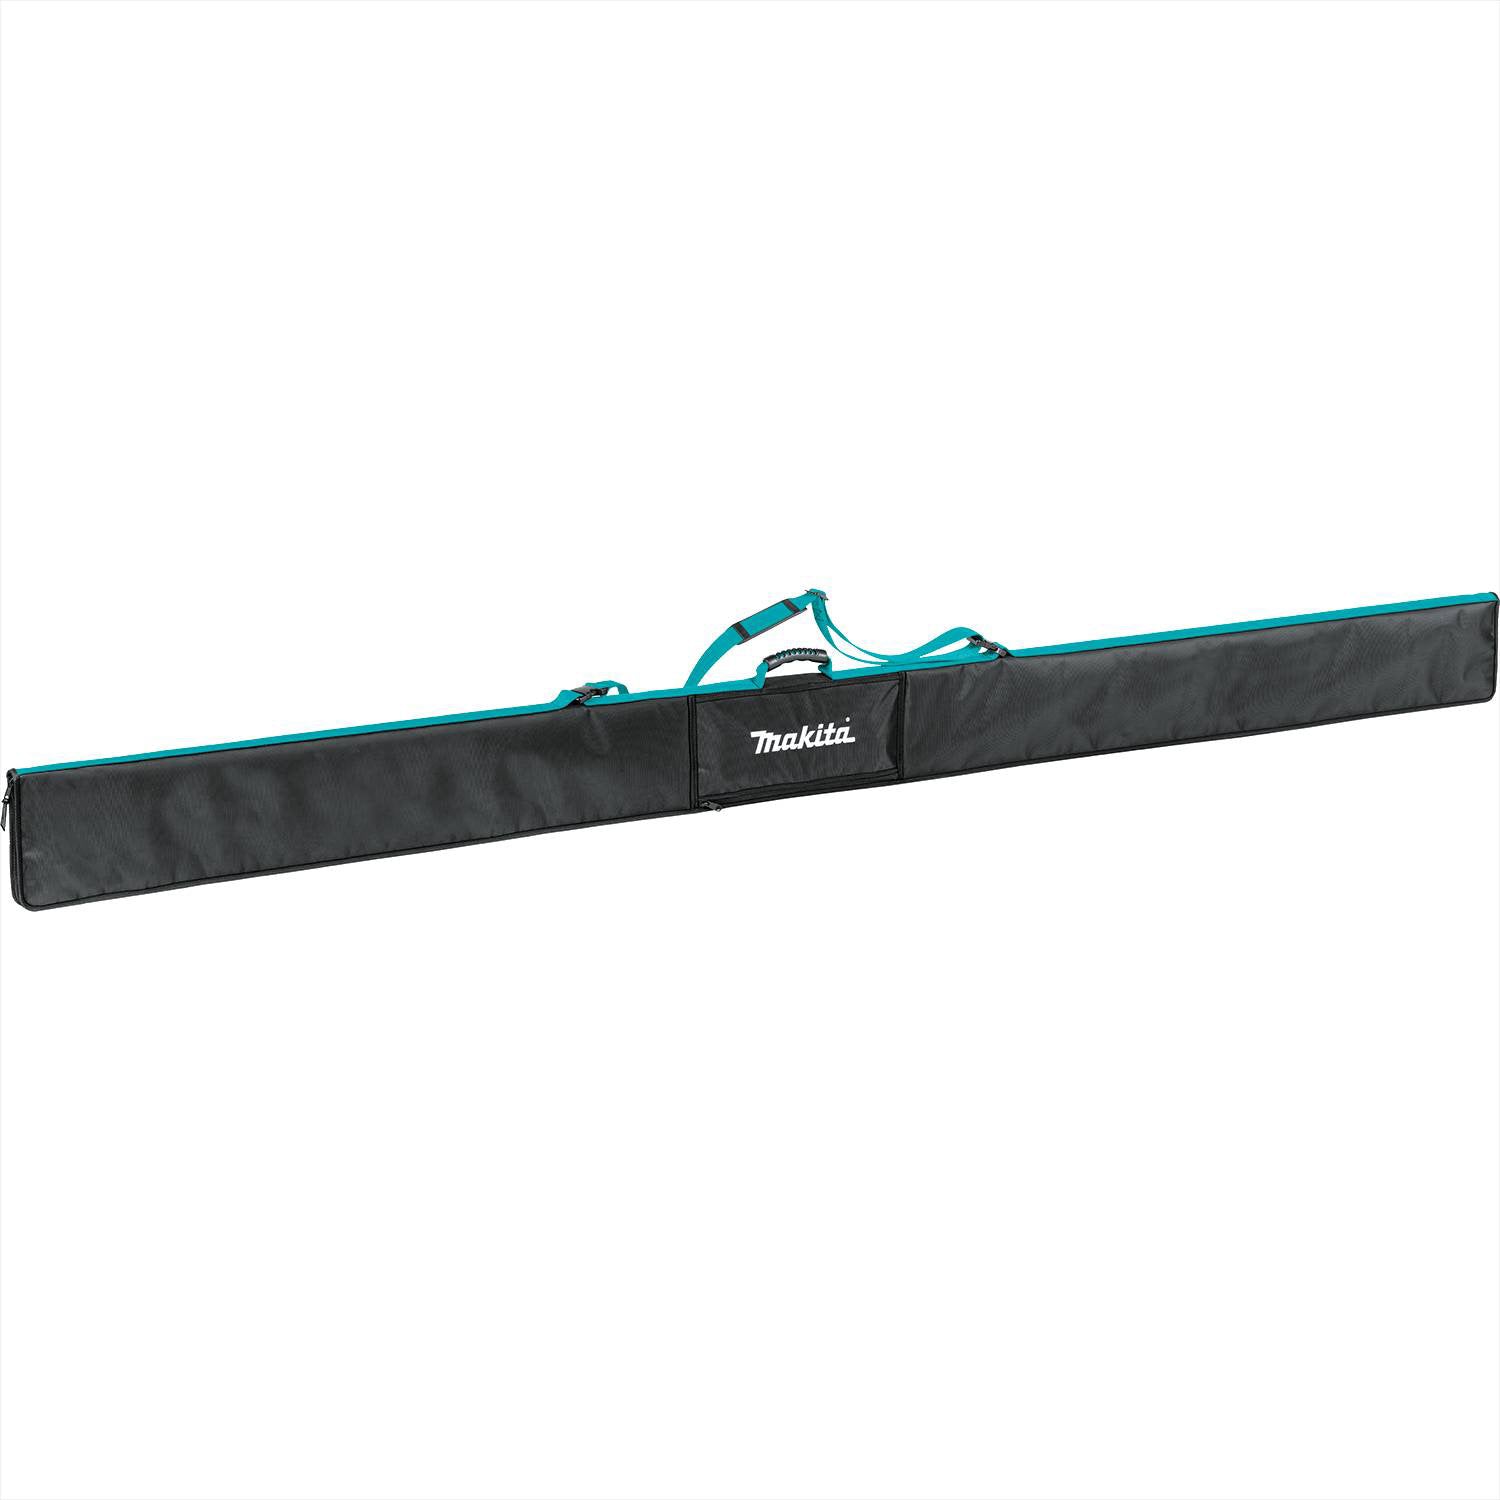 Premium Padded Protective Guide Rail Bag for Guide Rails up to 118"